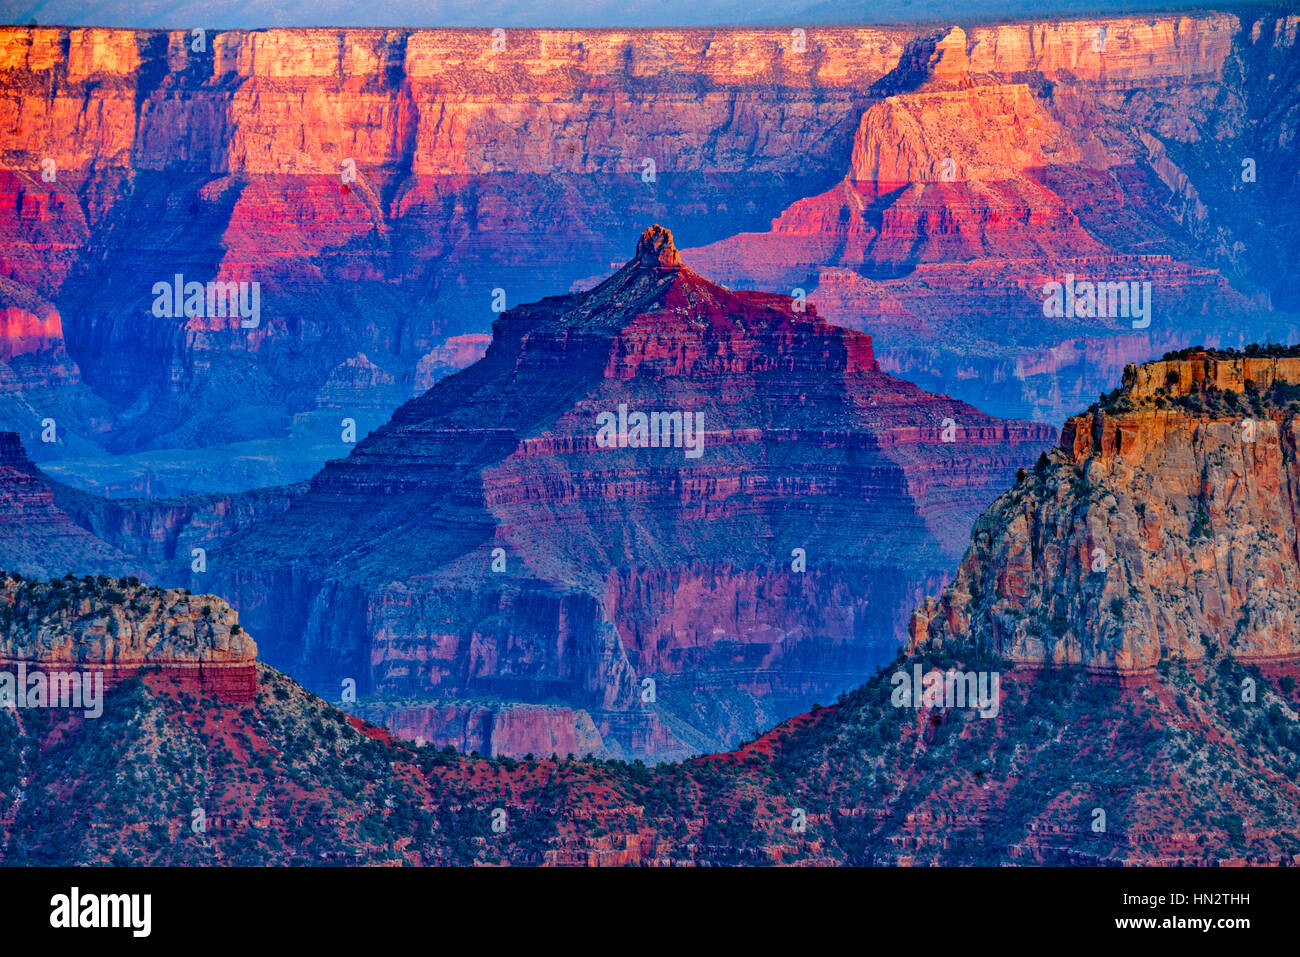 View From Bright Amgel Point, Grand Canyon National Park North Rim, Arizona Brahma and ZOraster Temples Stock Photo